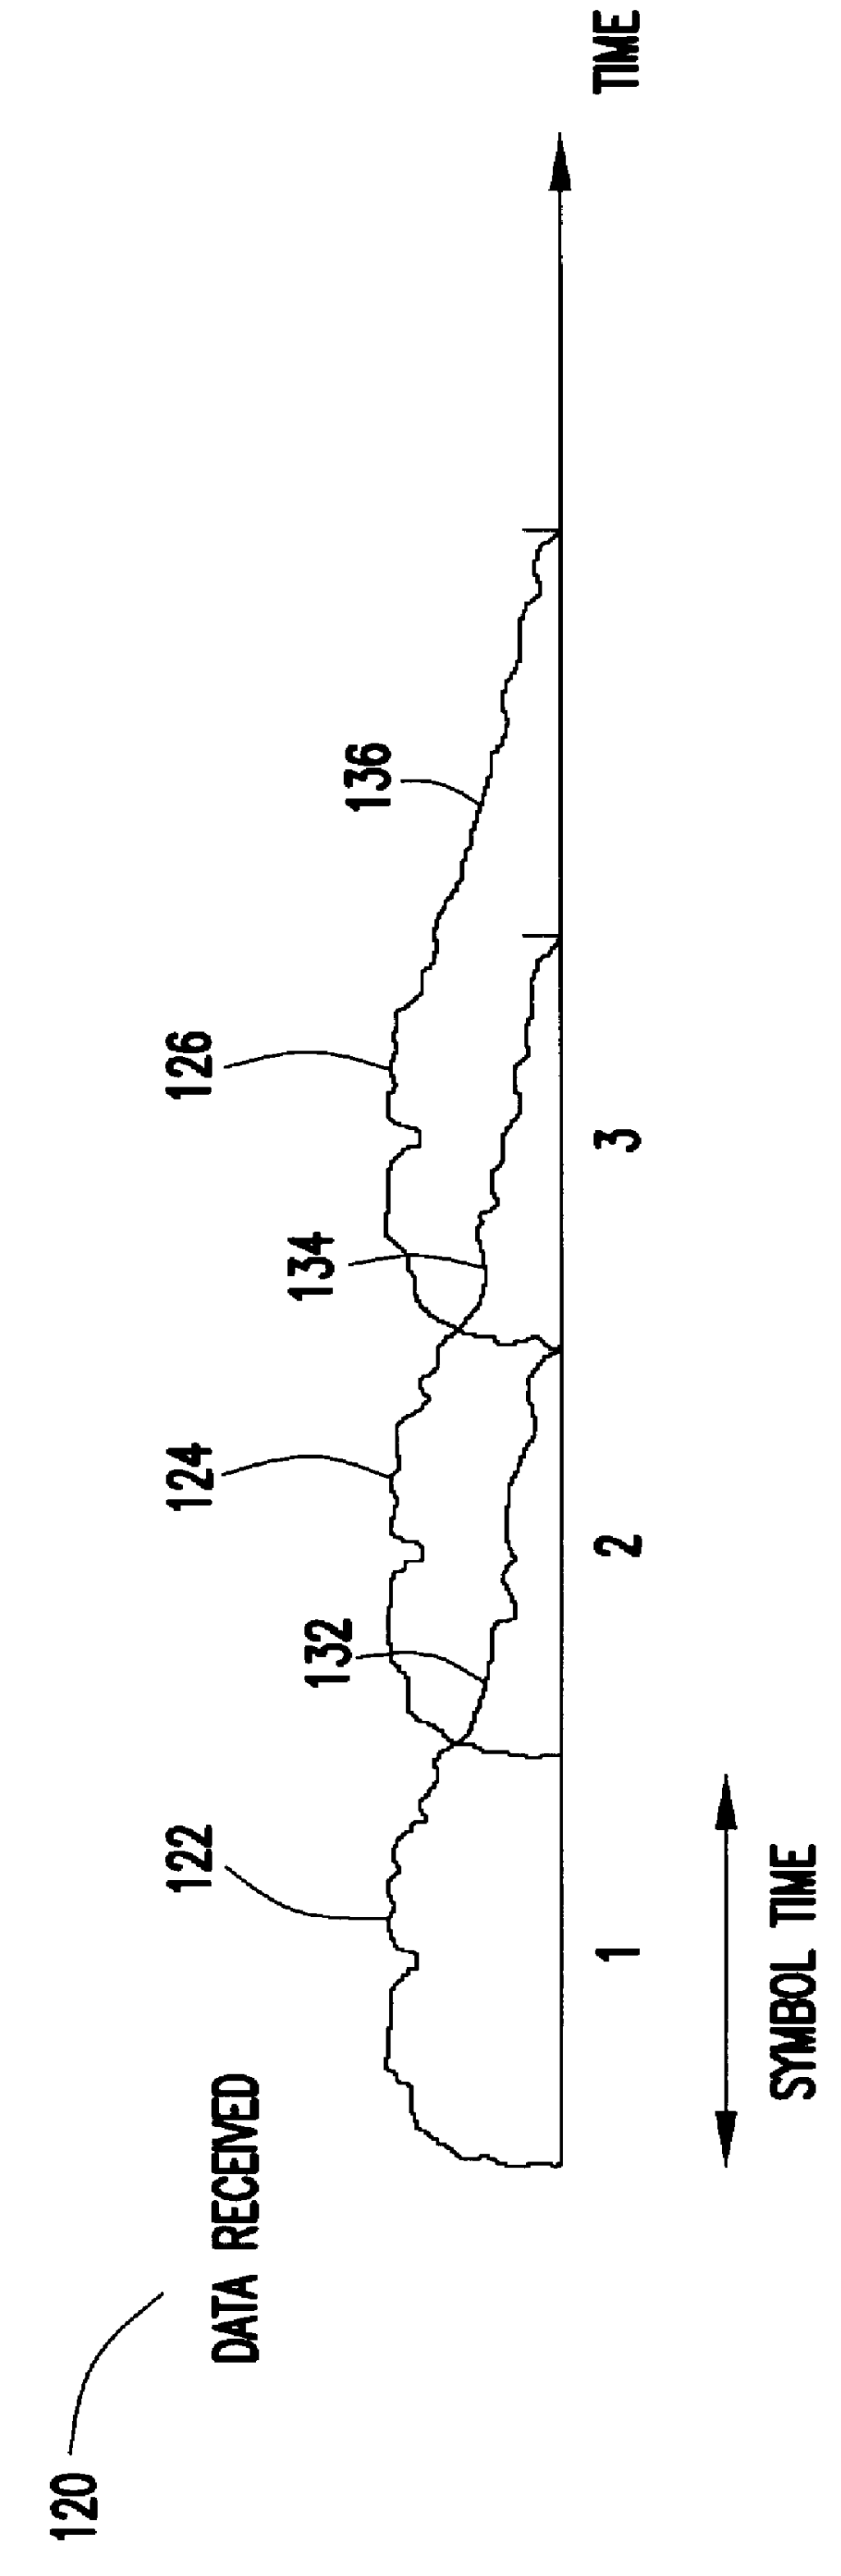 Adaptive equalizers and methods for carrying out equalization with a precoded transmitter